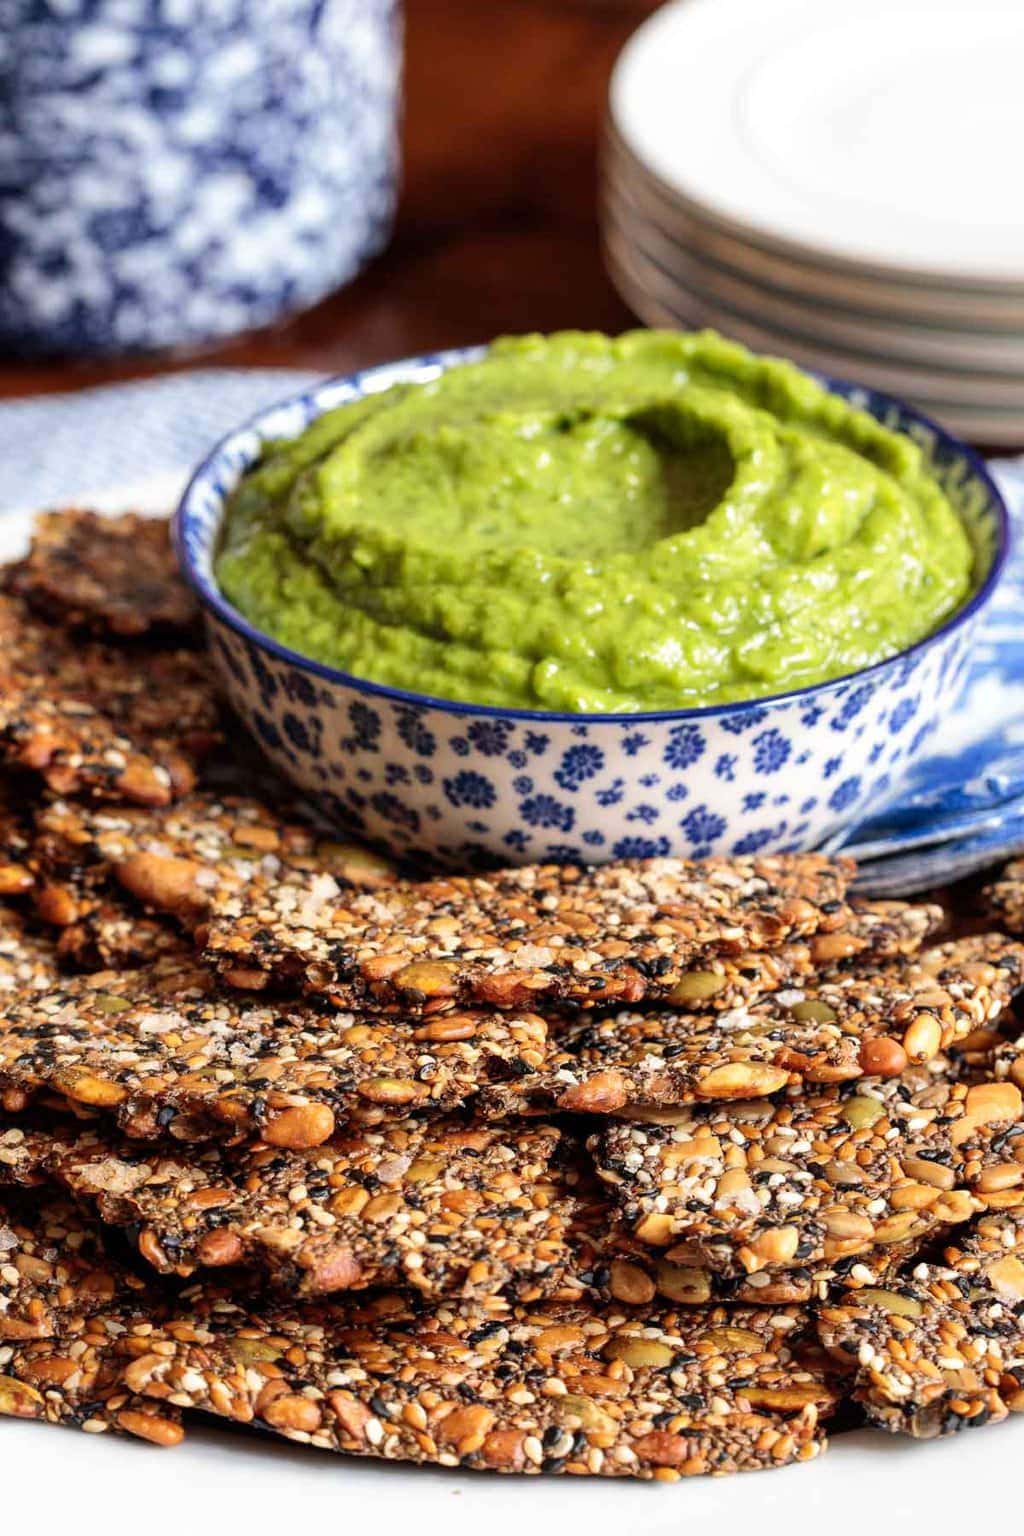 Vertical photo of Pine Nut Seeded Crackers with a bowl of avocado dip.